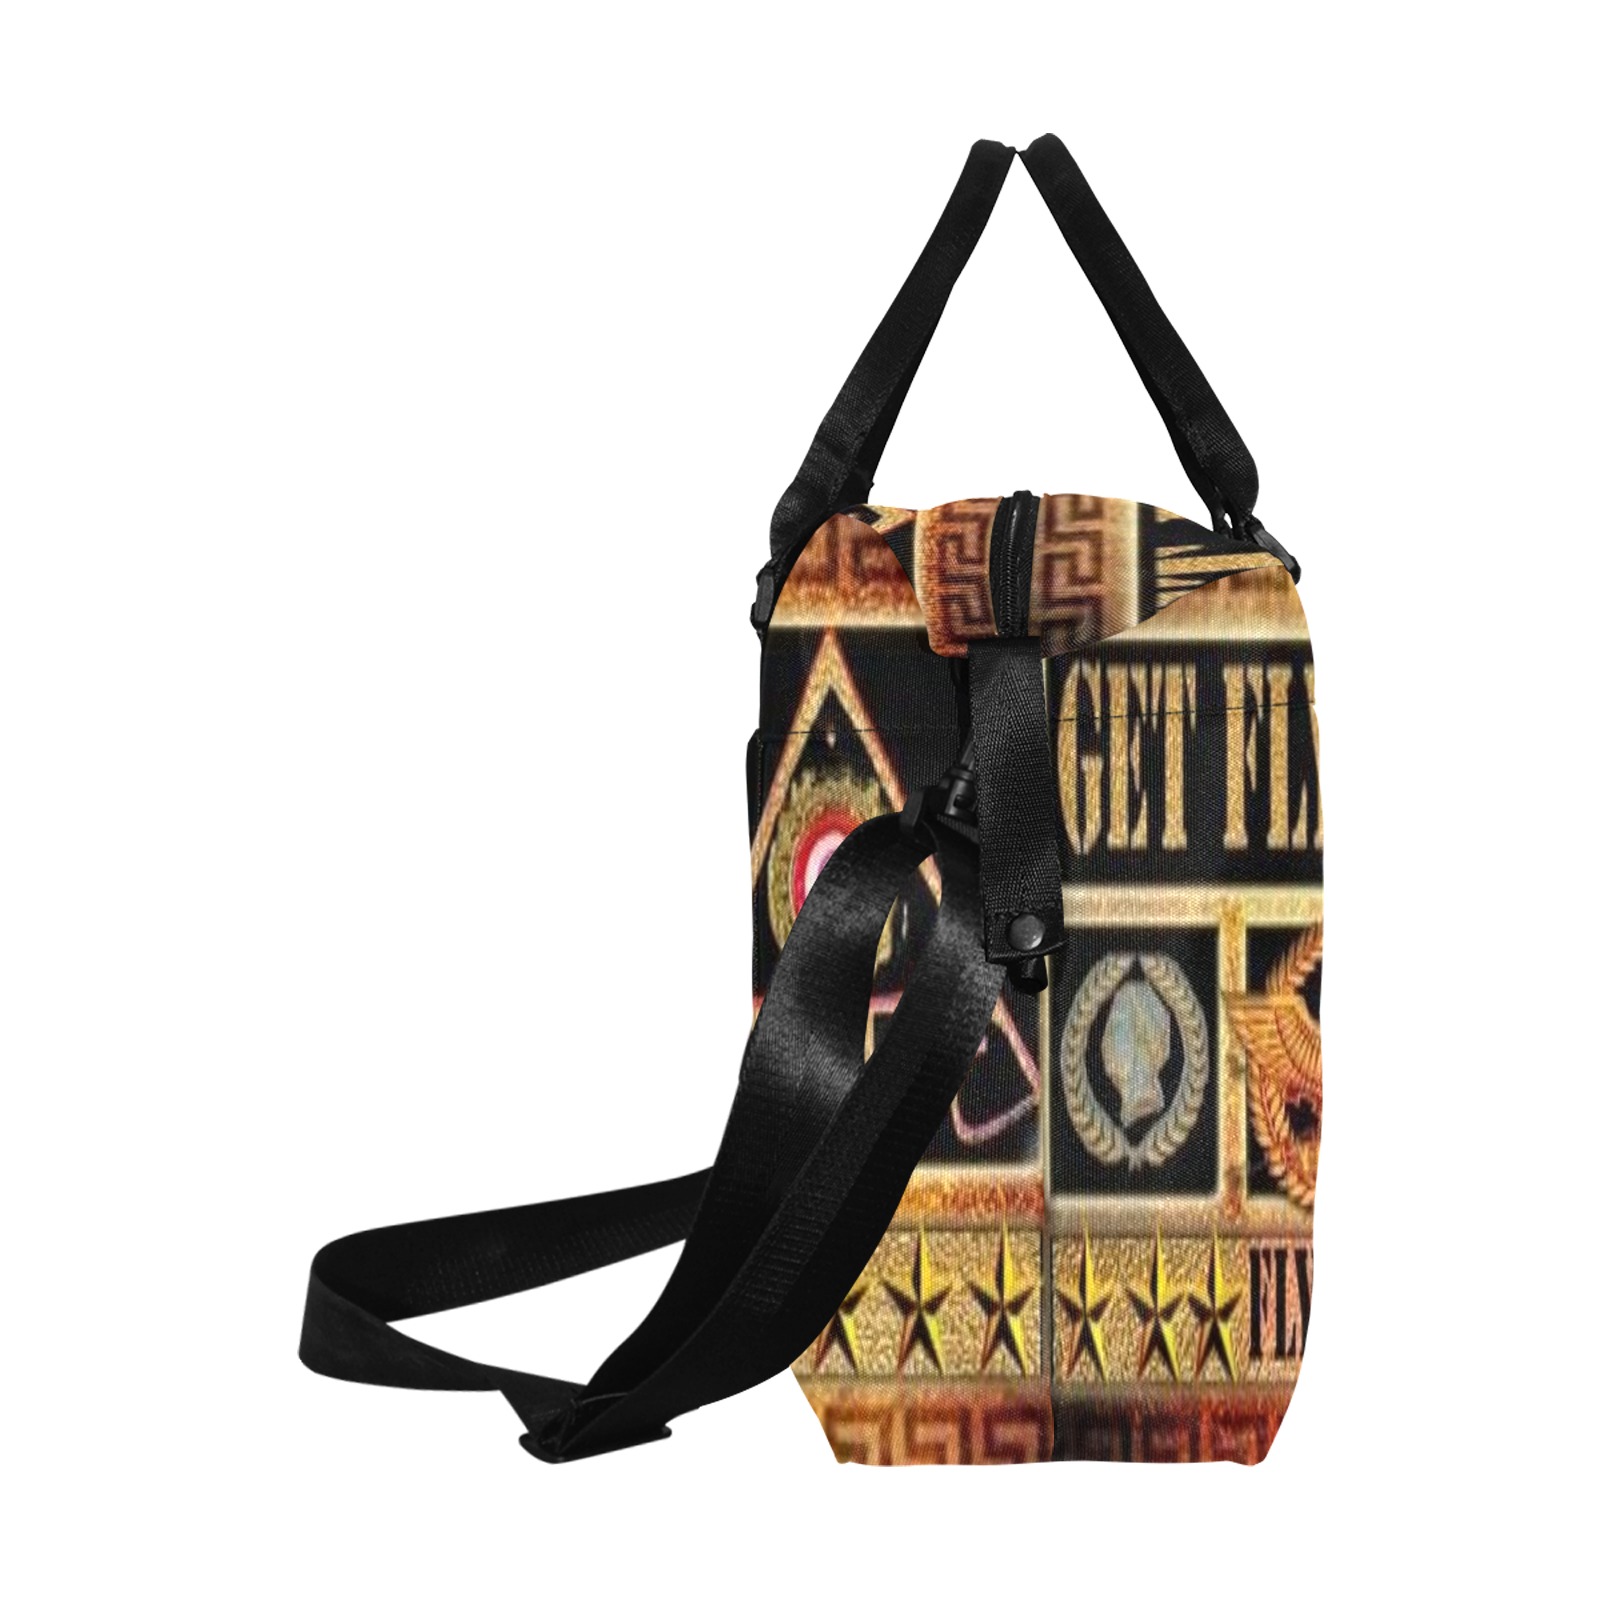 Flyest Attire Supplier Collectable Fly Large Capacity Duffle Bag (Model 1715)